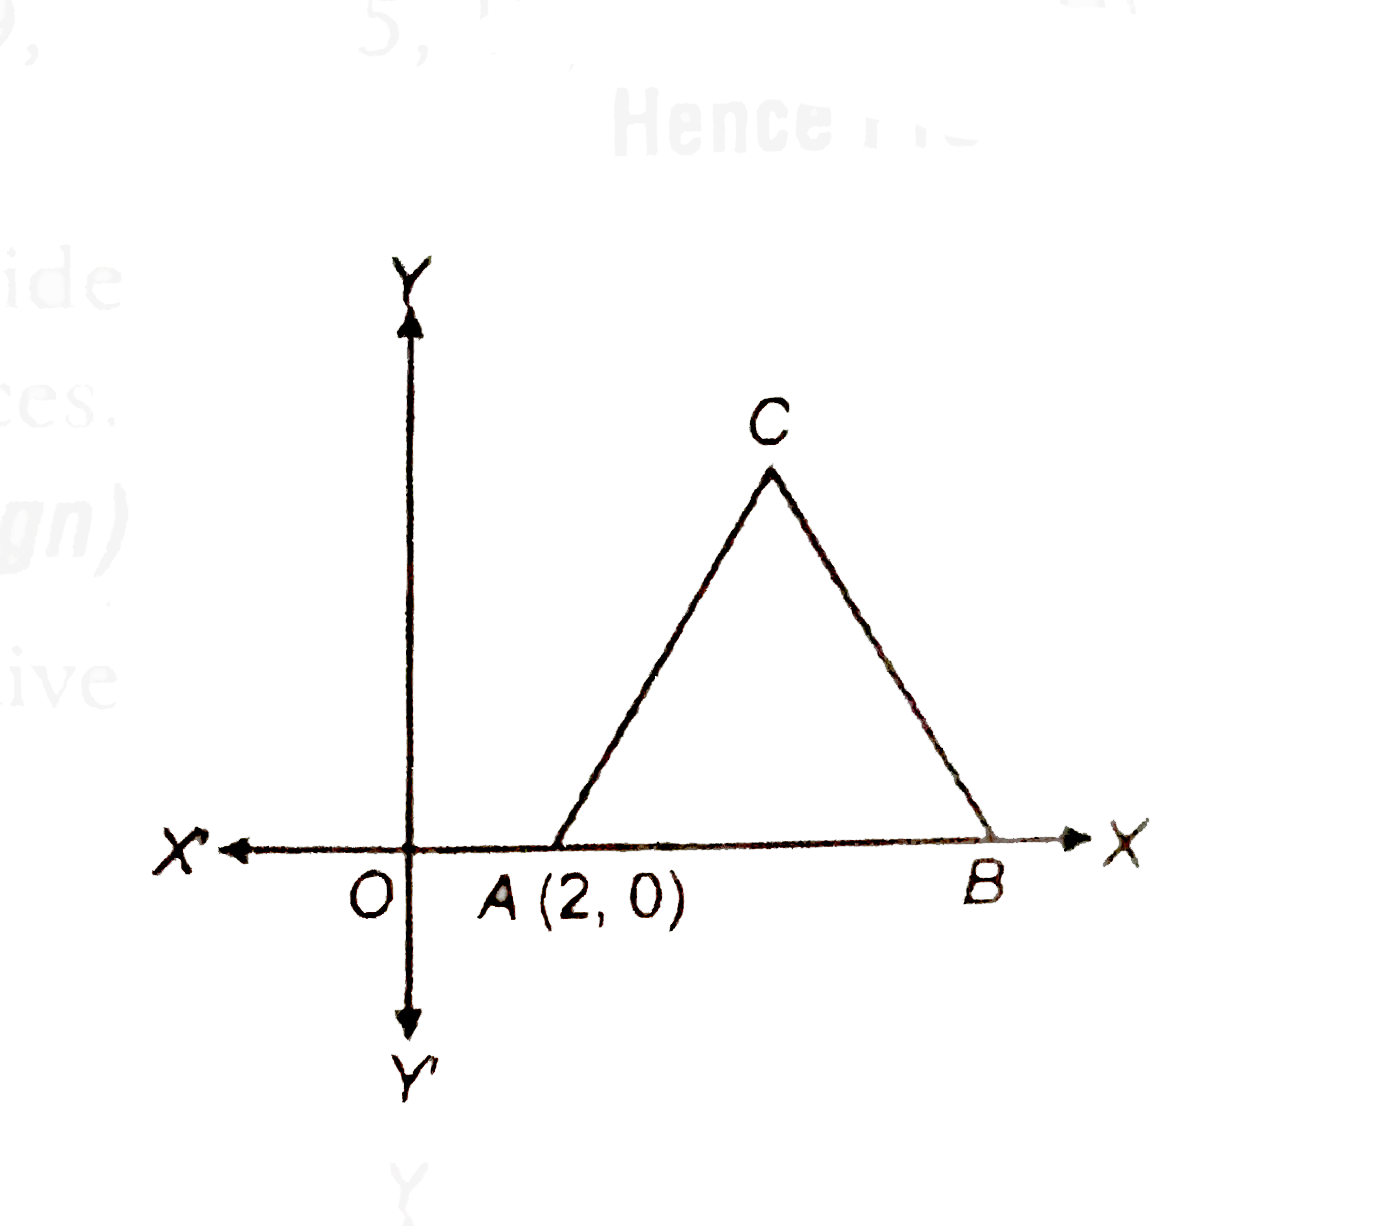 In the given  figure,  DeltaABC is an equilateral triangle of side 3 units. Find the coordinates of the  other two vertices.